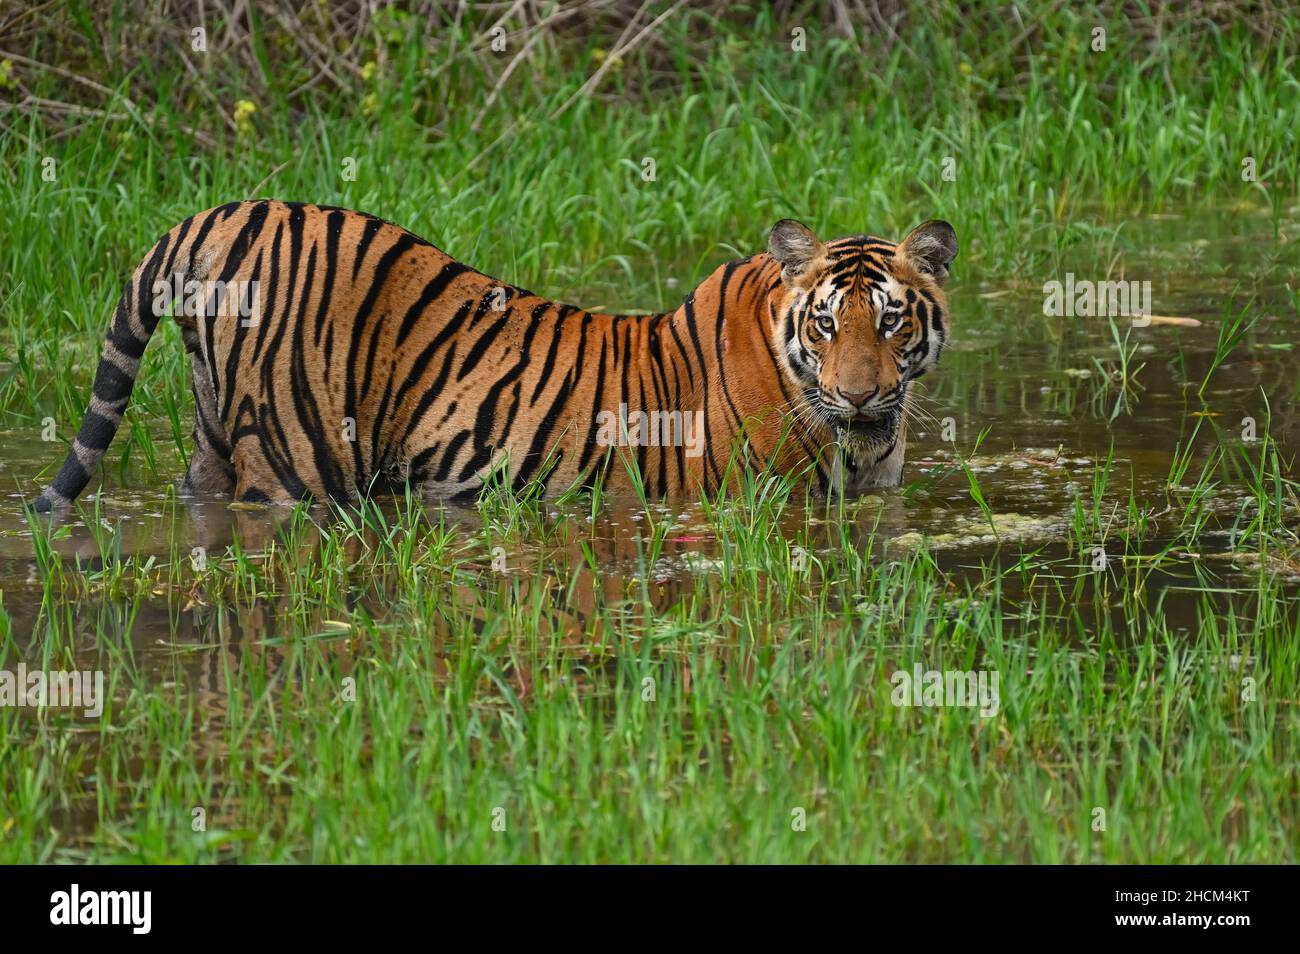 Cute tiger swimming on a river in a jungle Stock Photo